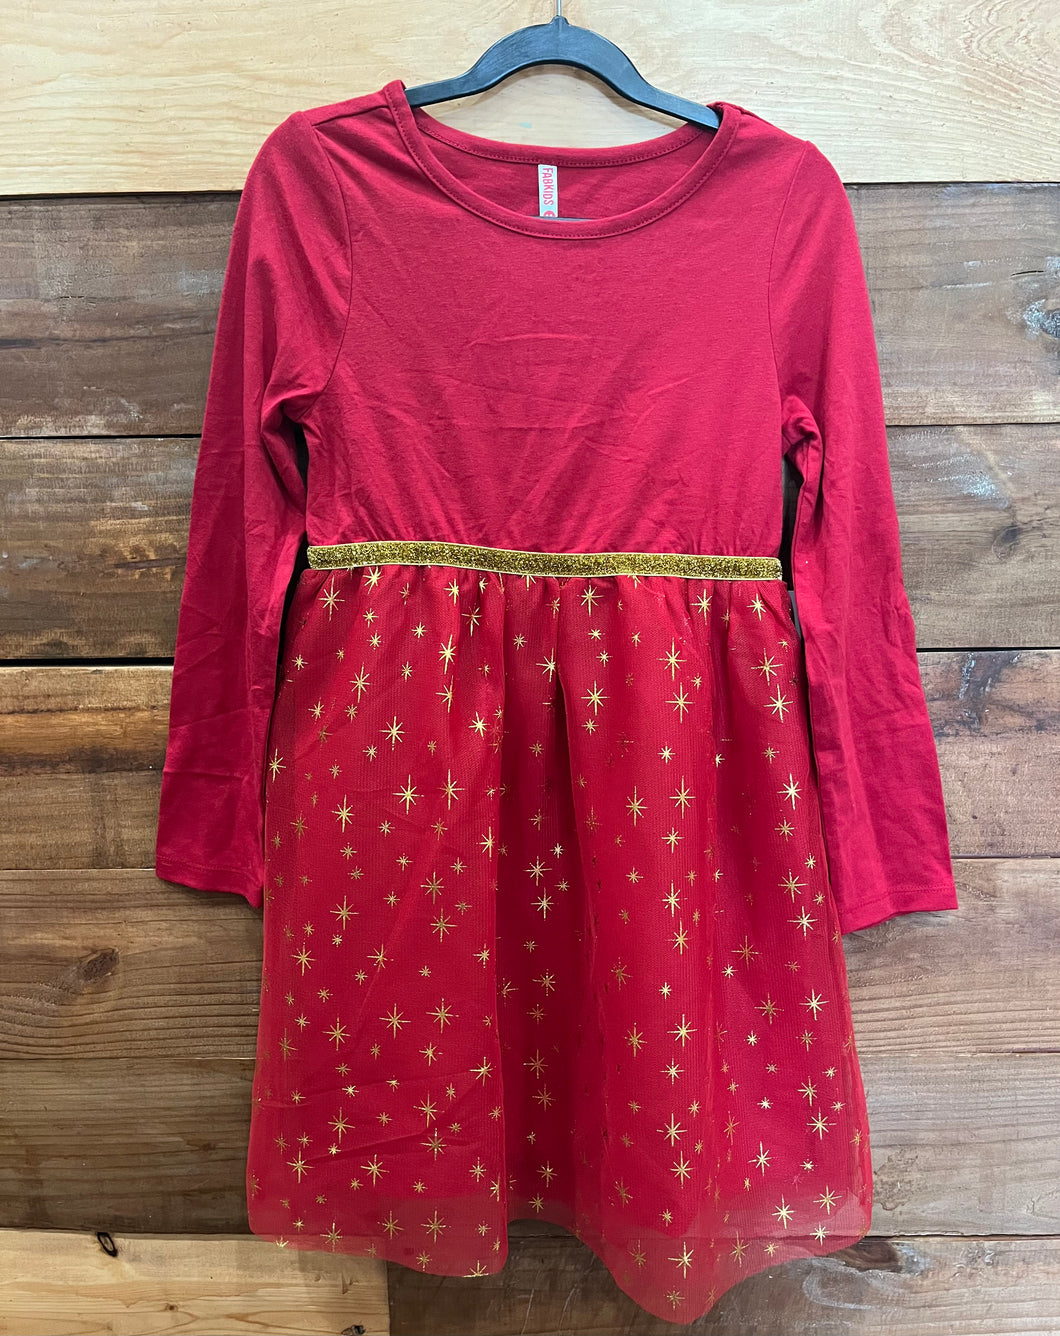 Fabkids Red Tulle Star Dress Size 8